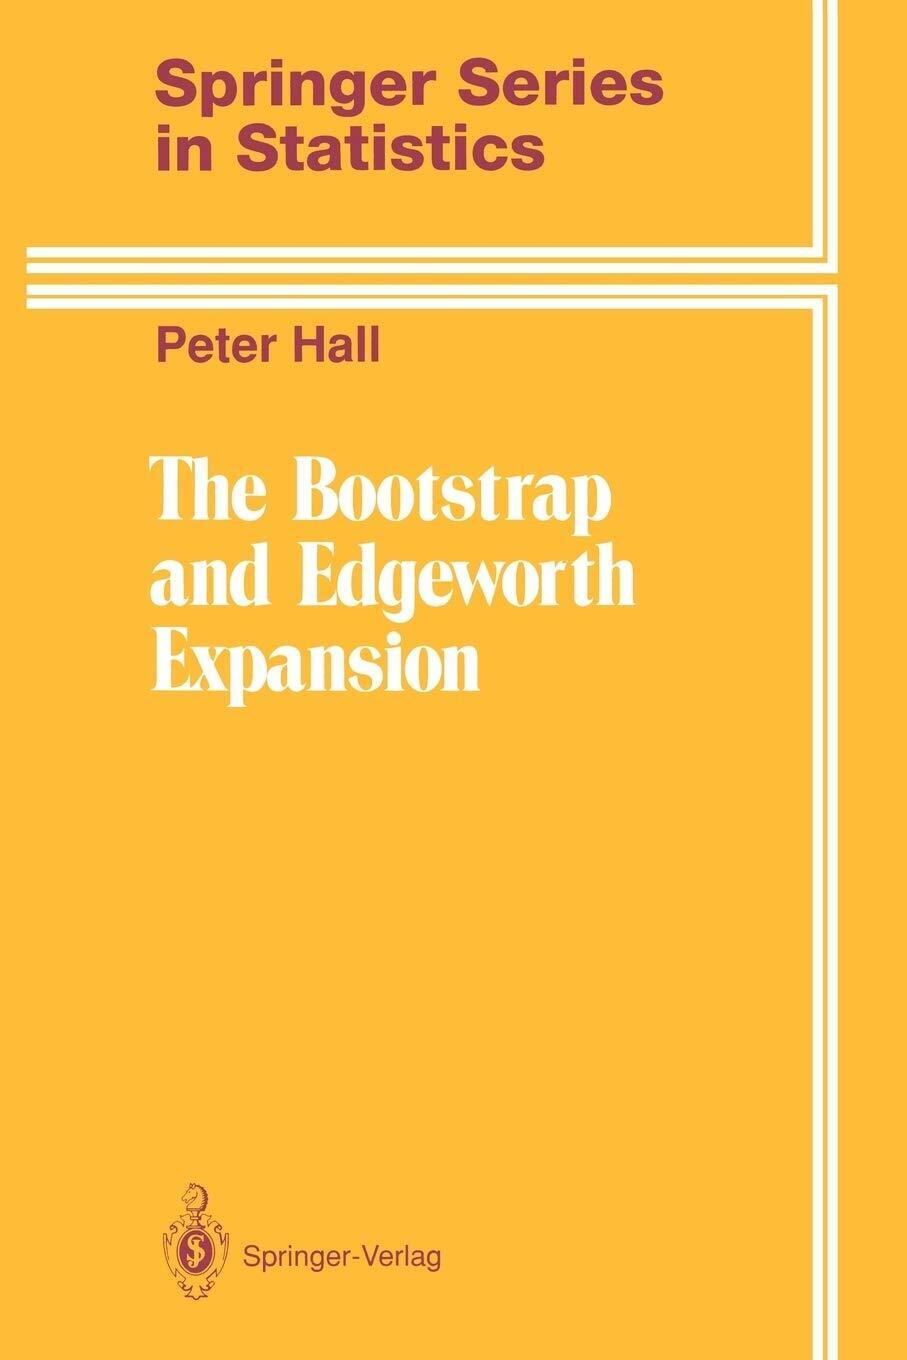 The Bootstrap and Edgeworth Expansion - Peter Hall - Springer, 1997